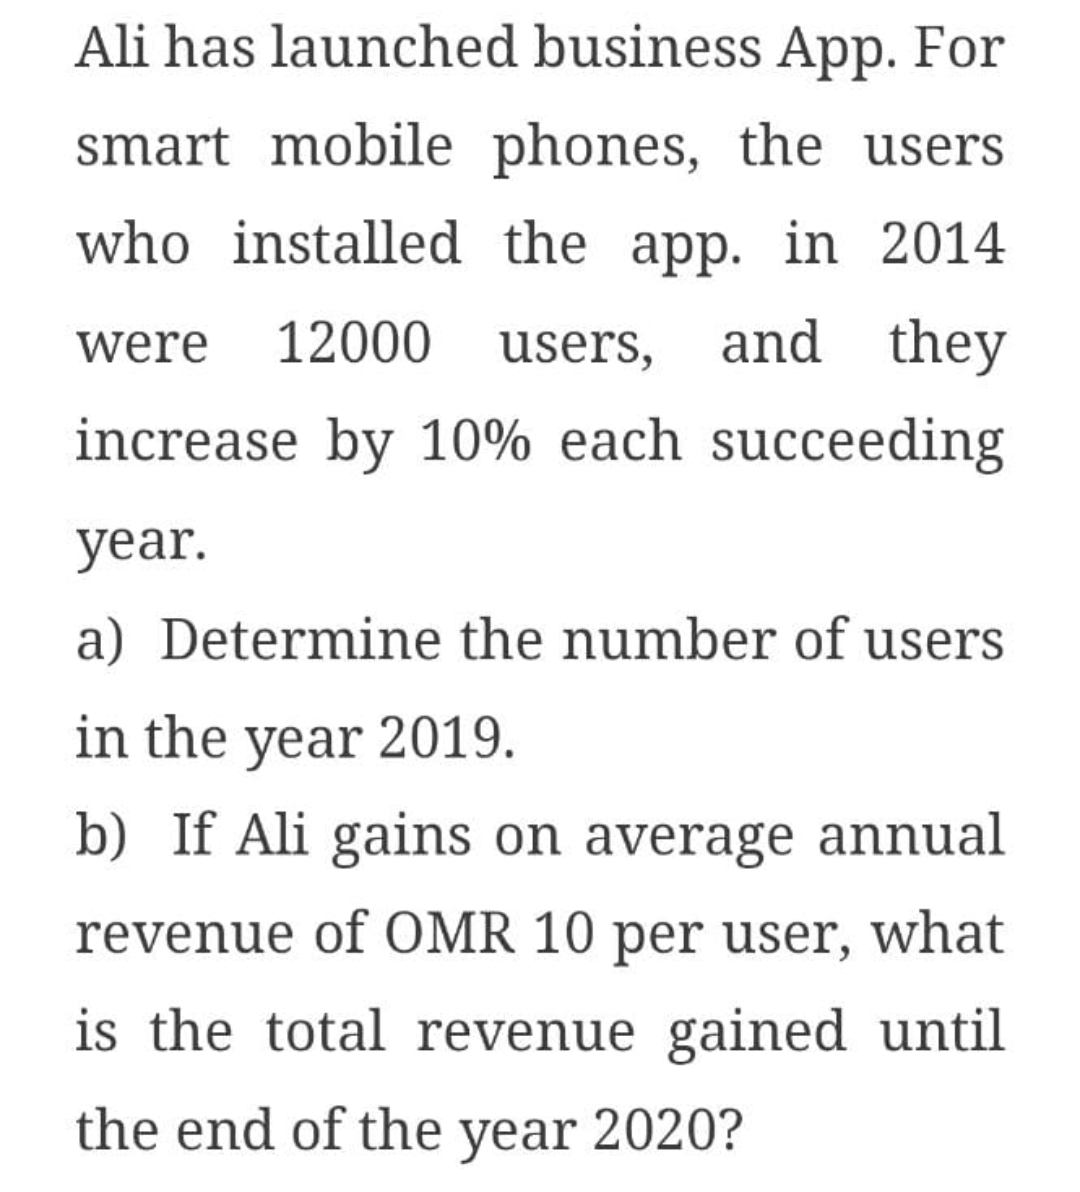 Ali has launched business App. For
smart mobile phones, the users
who installed the app. in 2014
12000
users,
and they
were
increase by 10% each succeeding
year.
a) Determine the number of users
in the year 2019.
b) If Ali gains on average annual
revenue of OMR 10 per user, what
is the total revenue gained until
the end of the year 2020?
